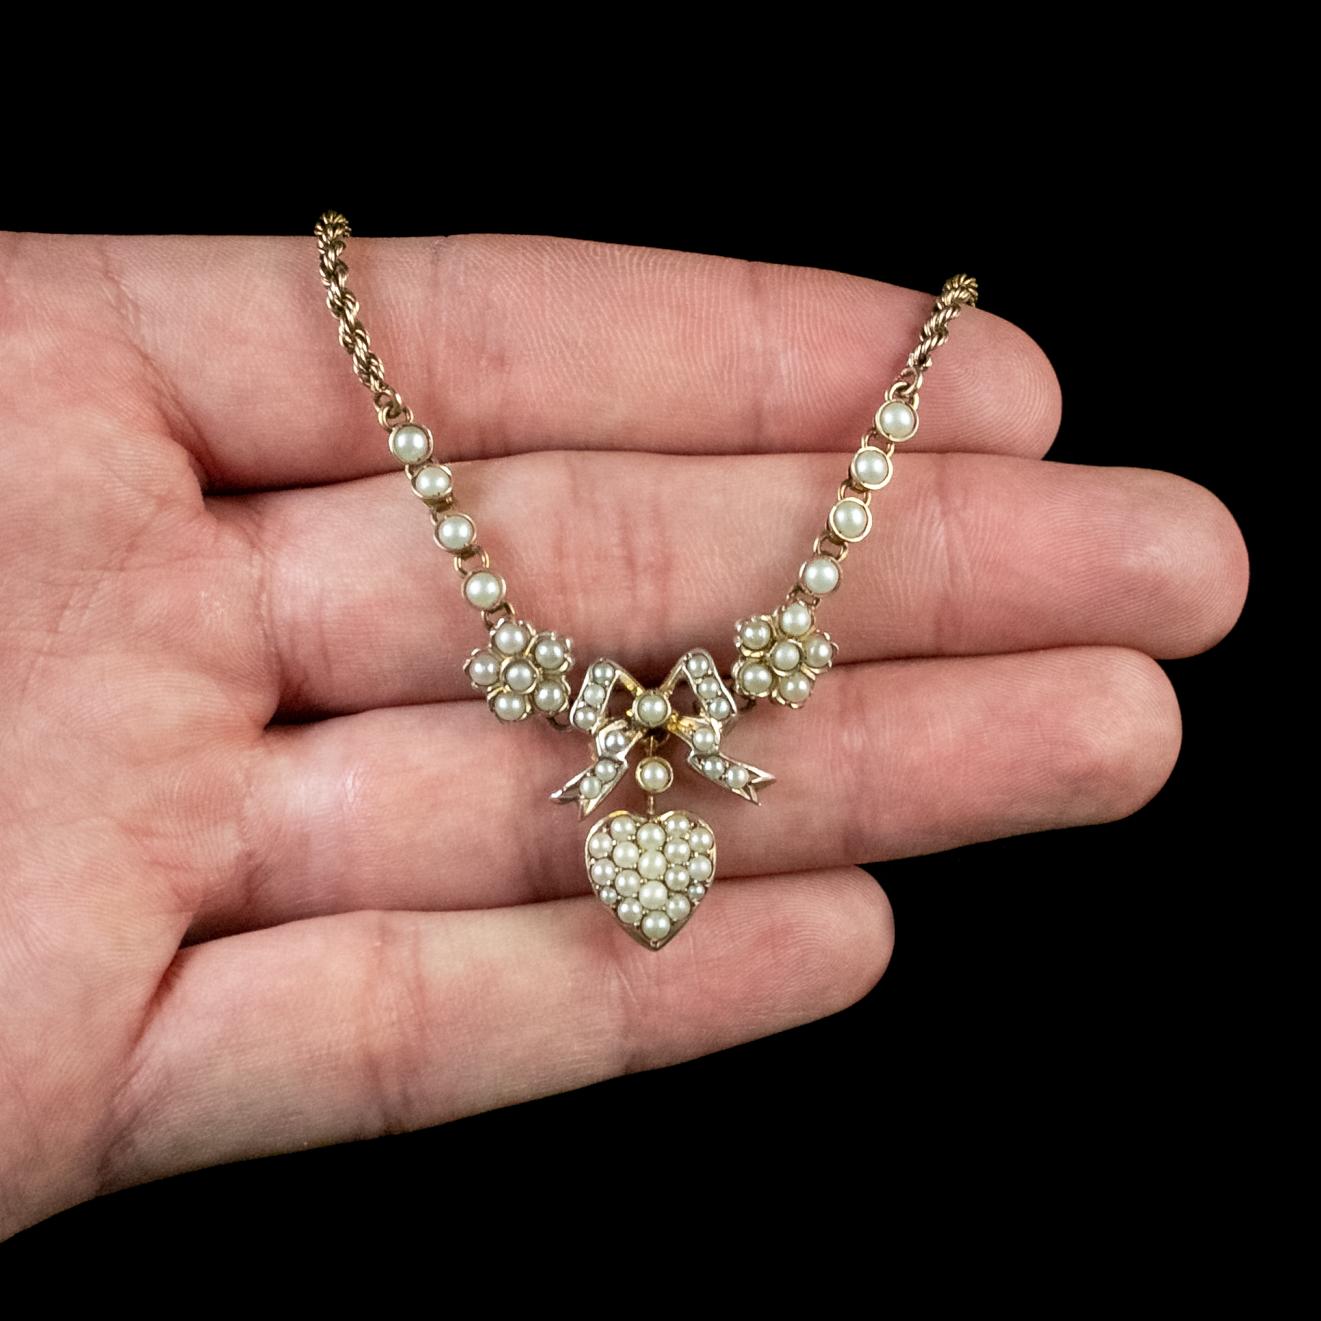 Antique Edwardian Pearl Heart Necklace Silver 15 Carat Gold, circa 1910 For Sale 3